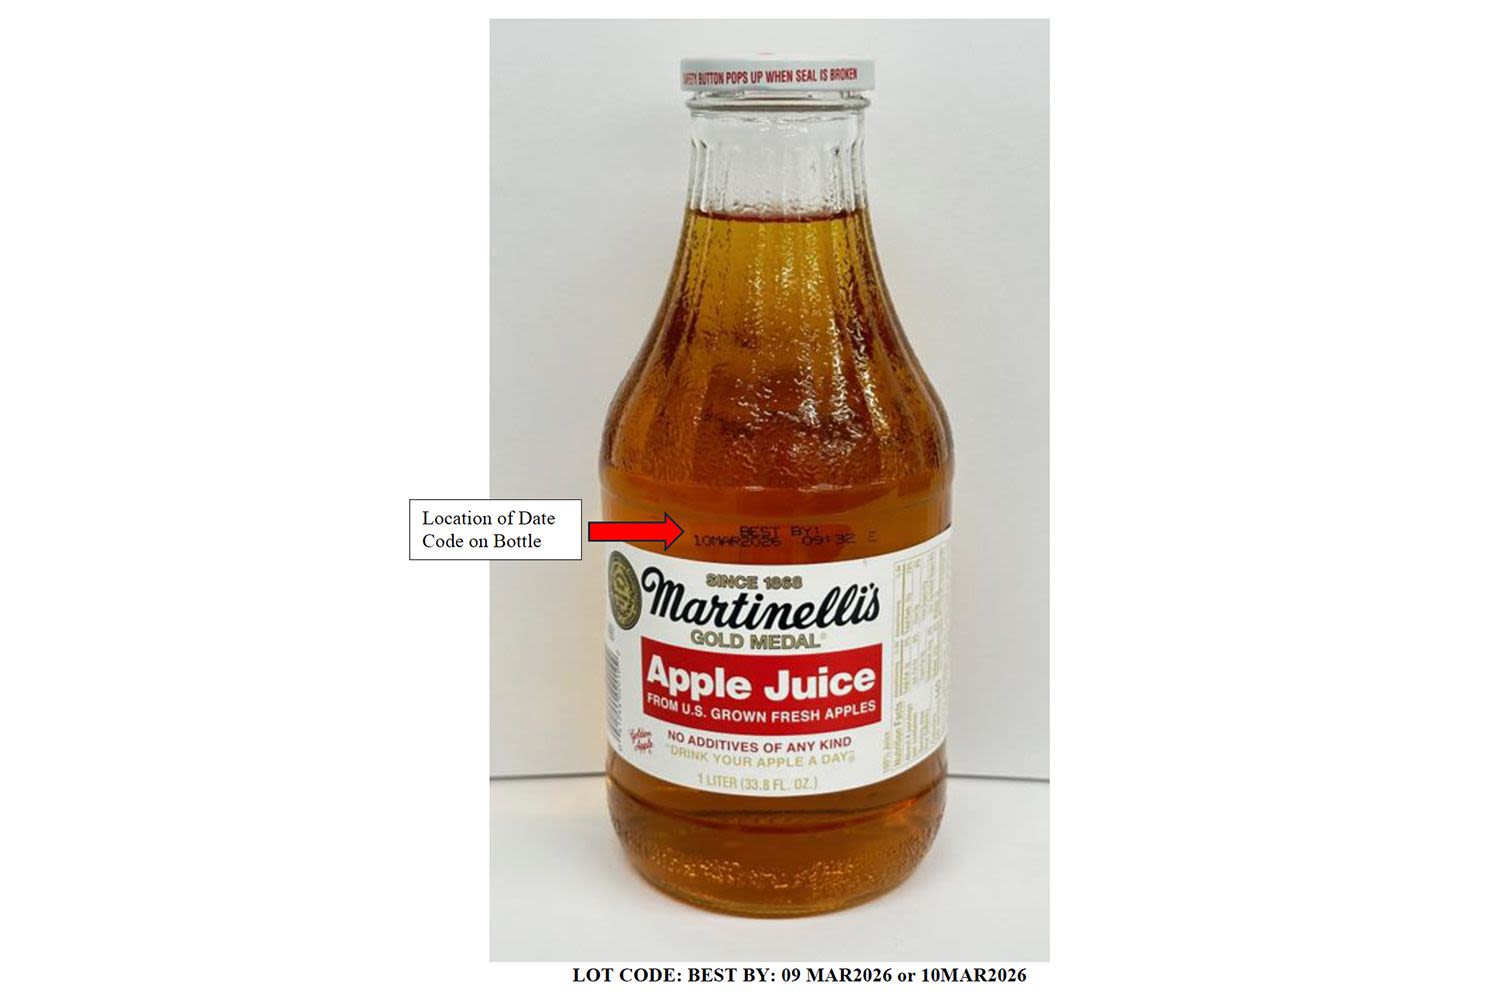 Martinelli’s Apple Juice Recalled Over 'Elevated' Arsenic Levels in More Than 30 States